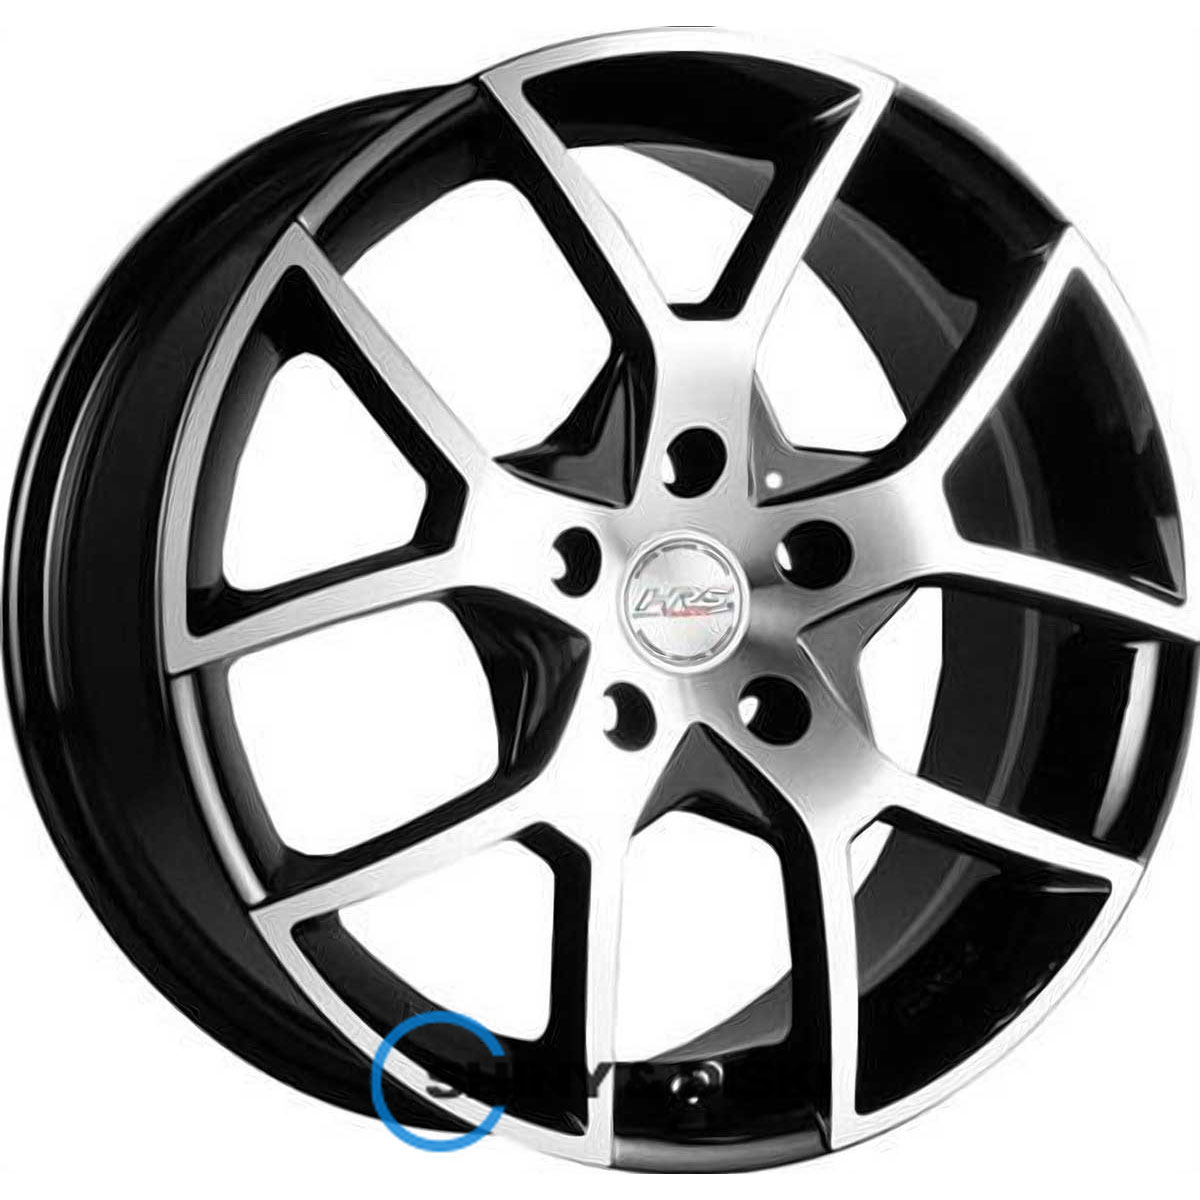 rs tuning h-466 bkfp r16 w7 pcd5x114.3 et42 dia67.1